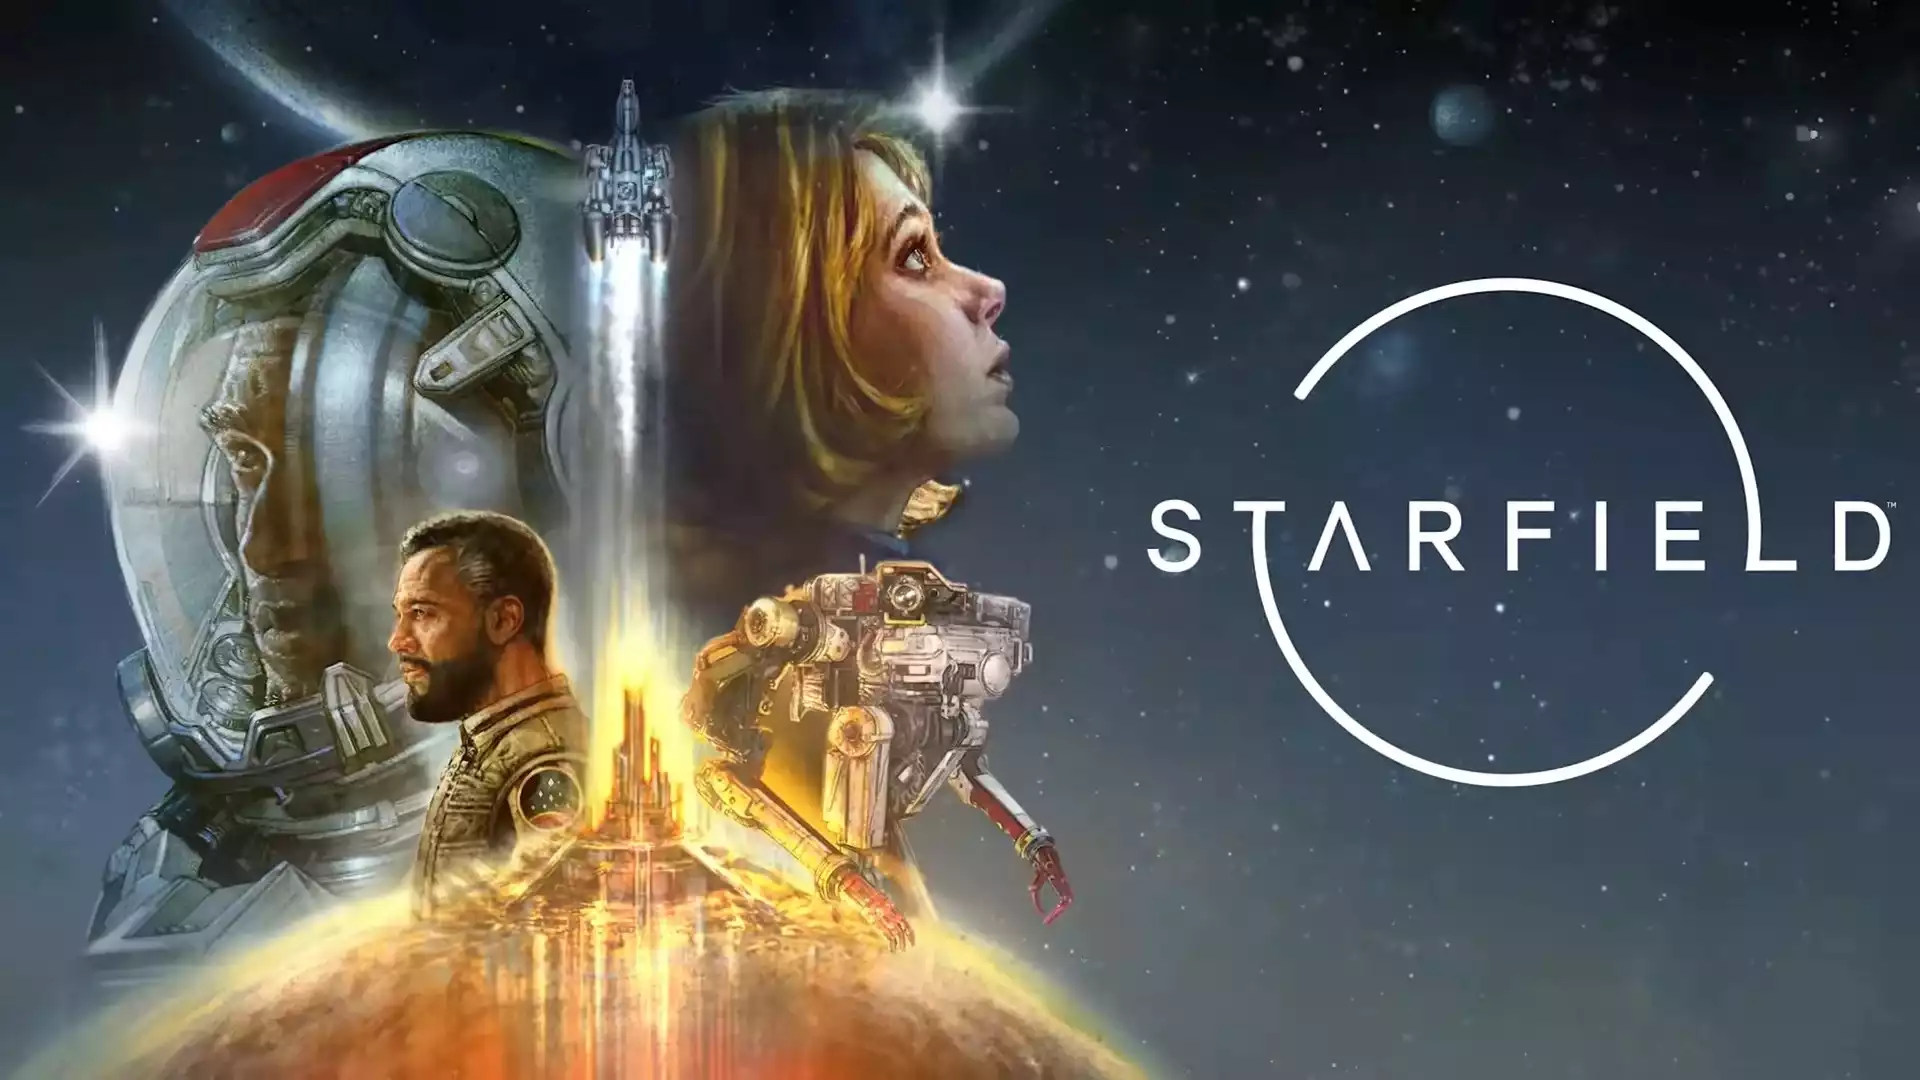 Starfield special editions explained: Standard, Premium & Constellation